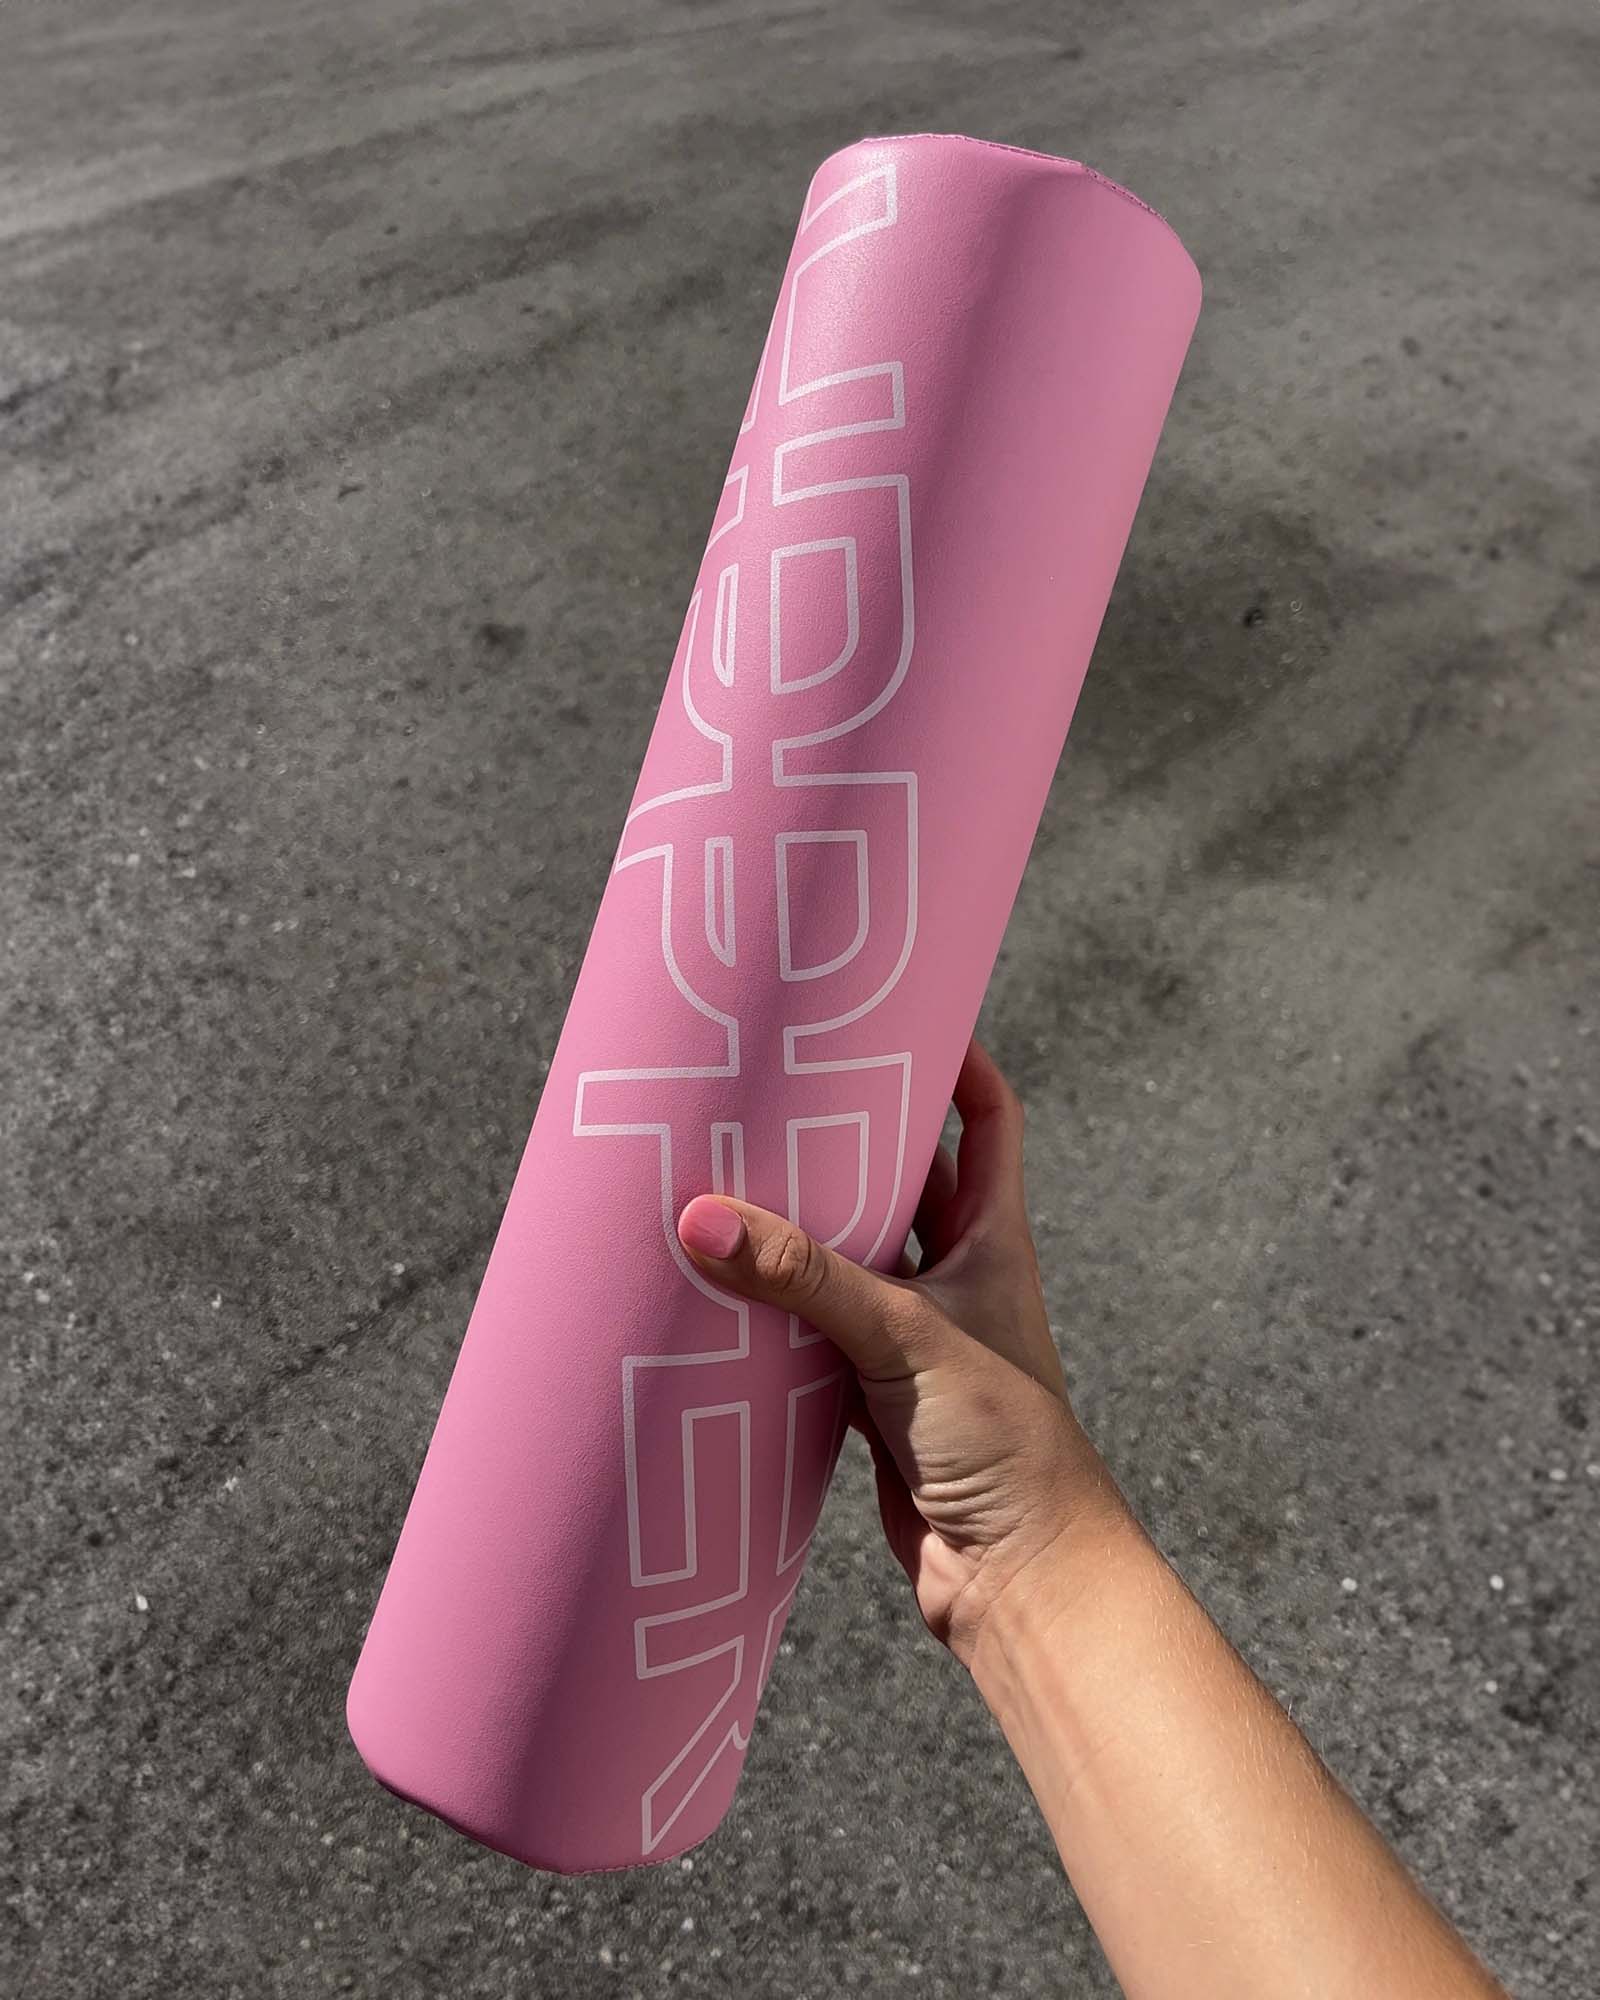 woman holding pink barbell pad